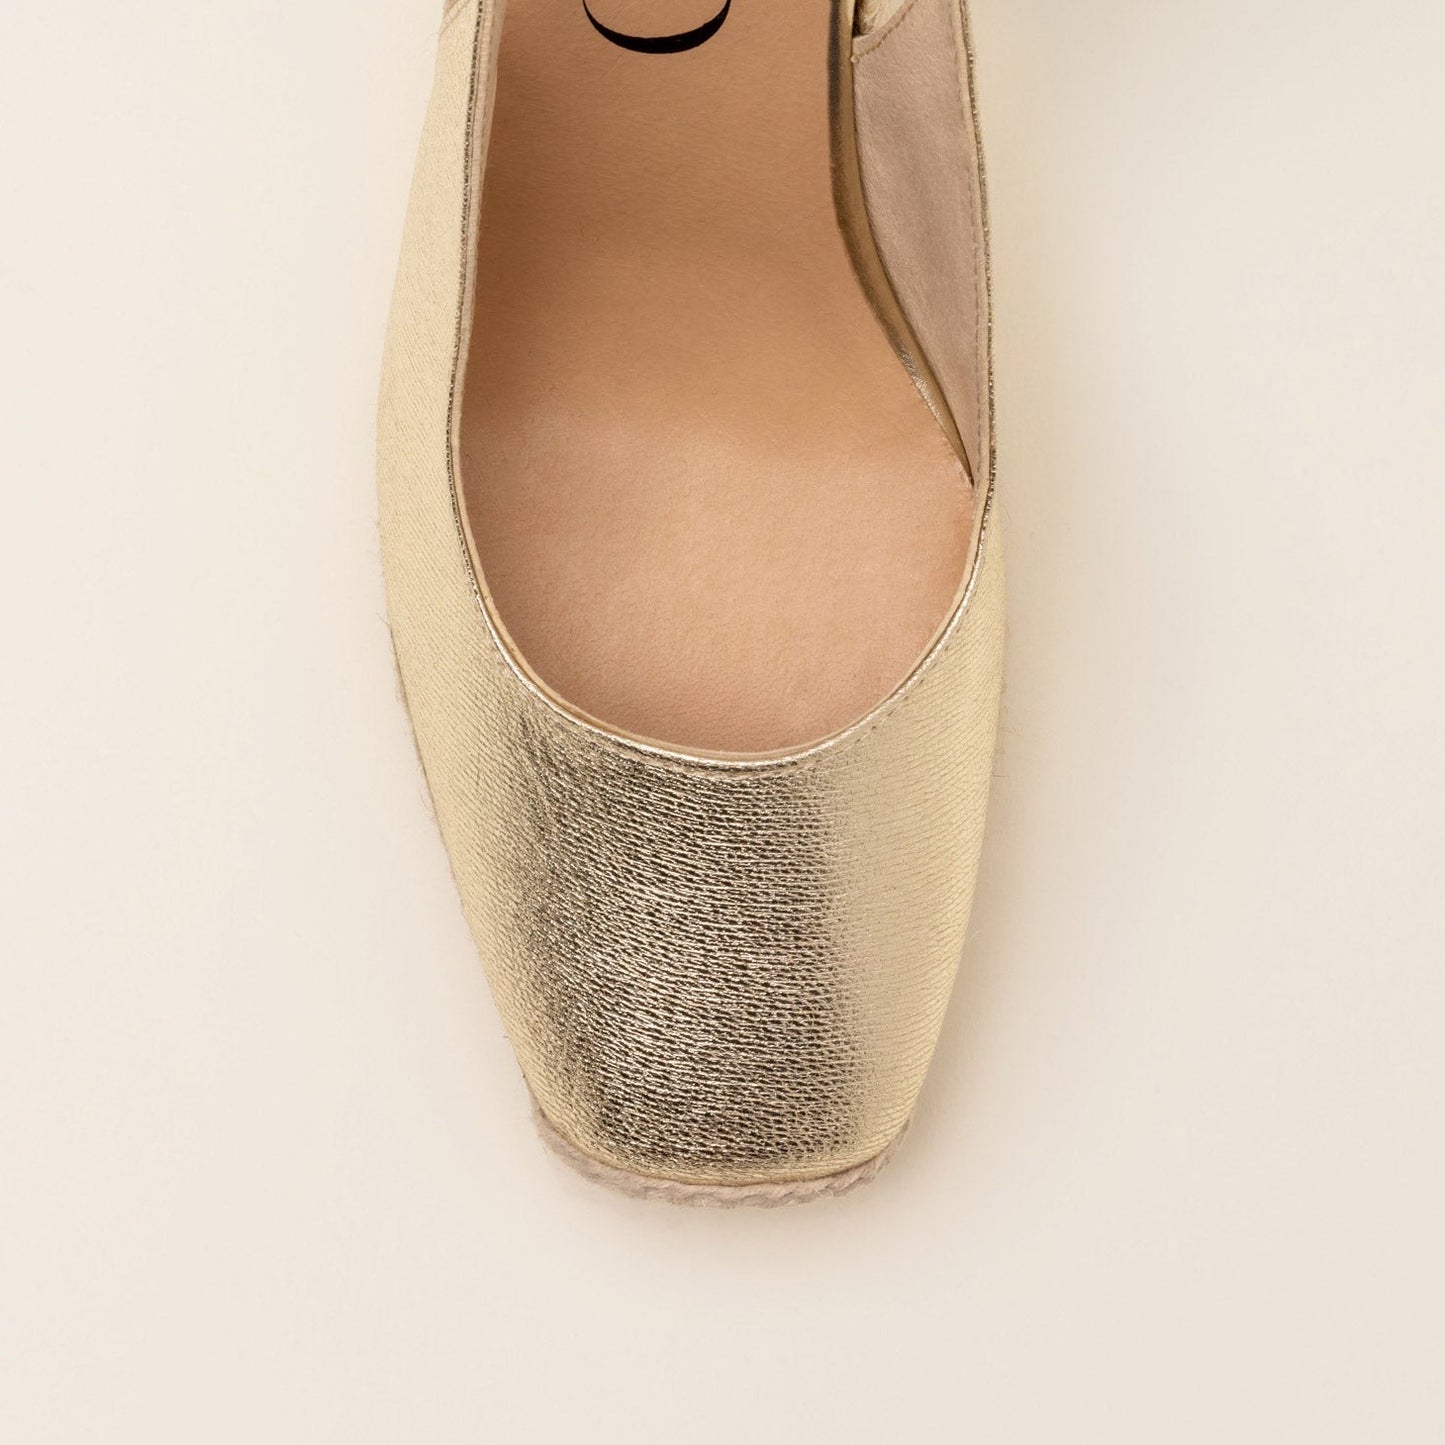 gold wedges handmade espadrilles in metallic leather and jute shoes espadrilles Singapore